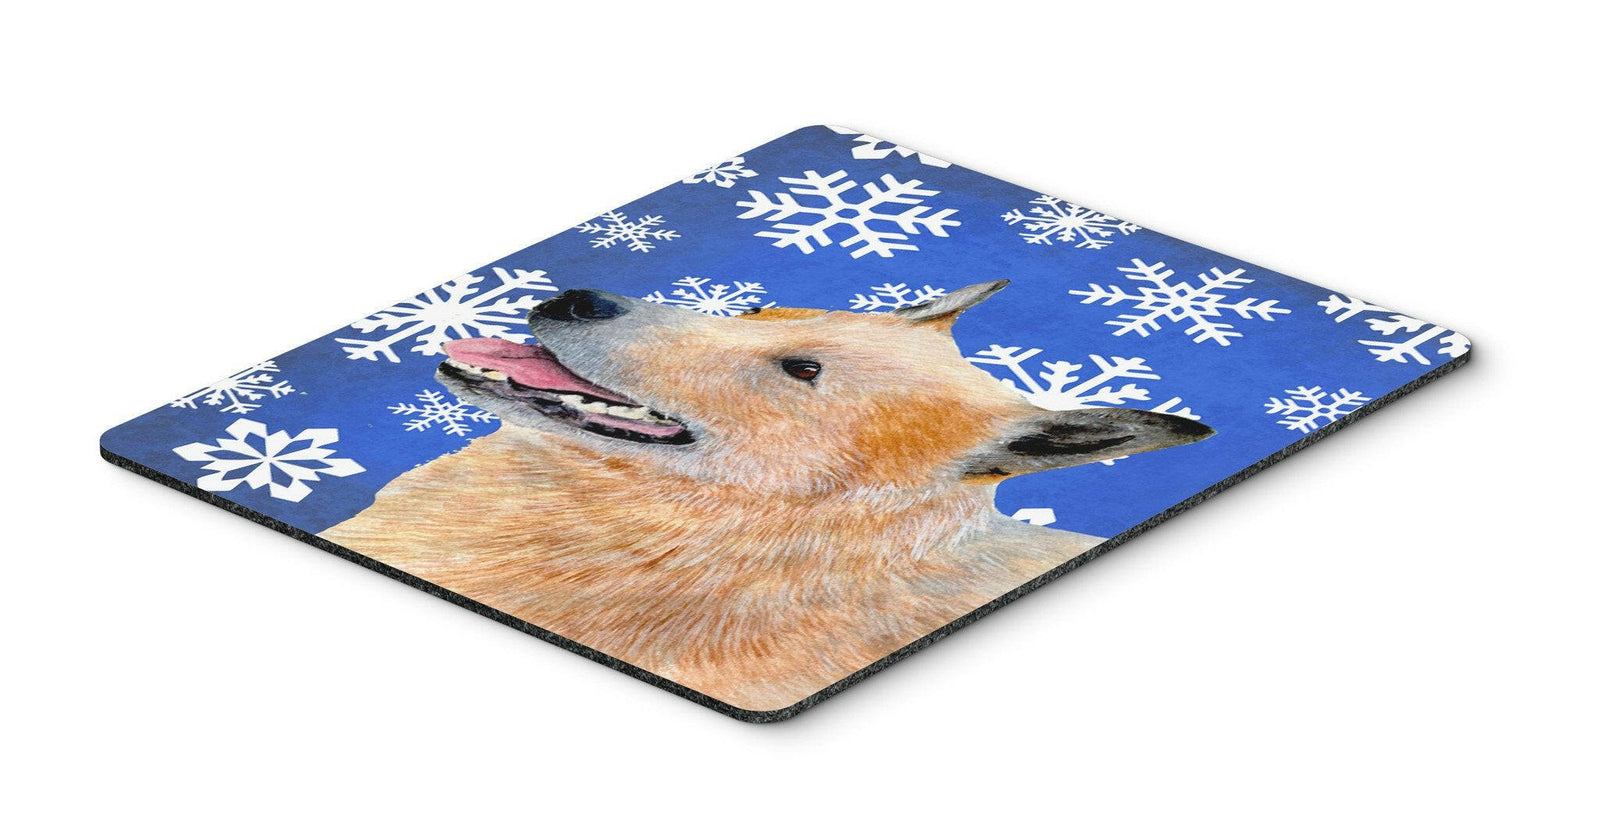 Australian Cattle Dog Winter Snowflakes Holiday Mouse Pad, Hot Pad or Trivet by Caroline's Treasures